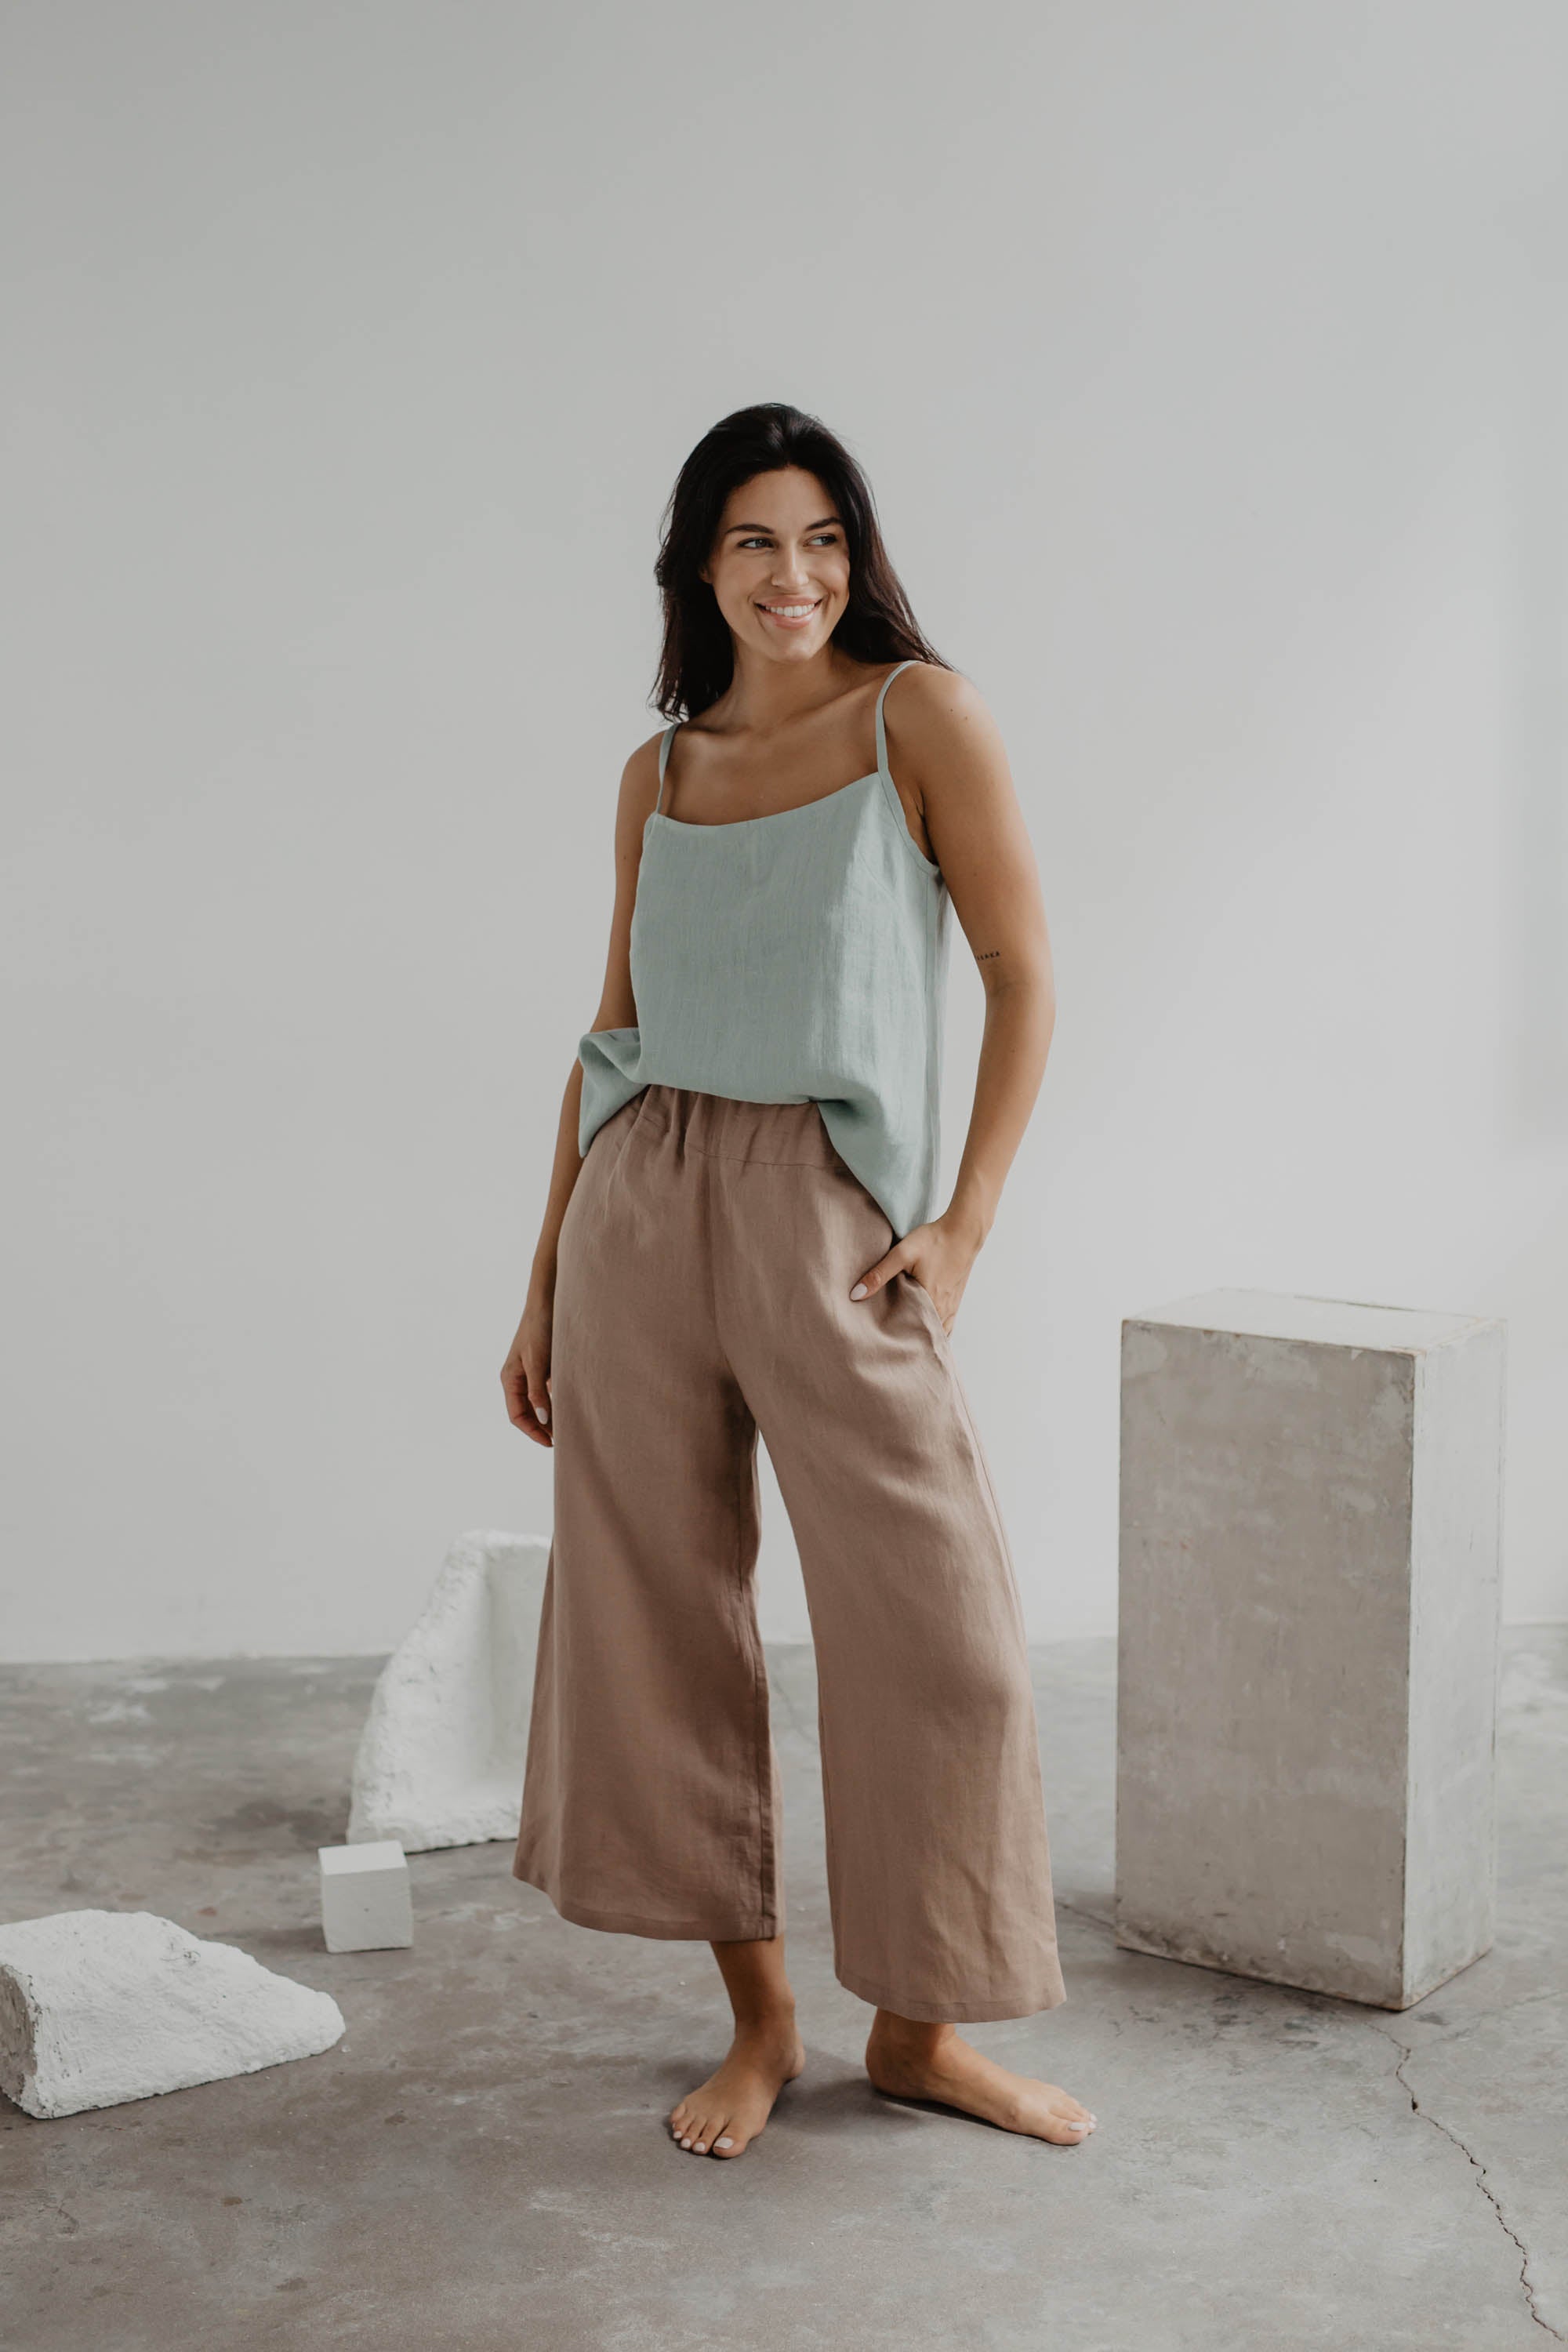 Woman In Gallery Wearing Dusty Rose Linen Pants and Sage Green Linen Top